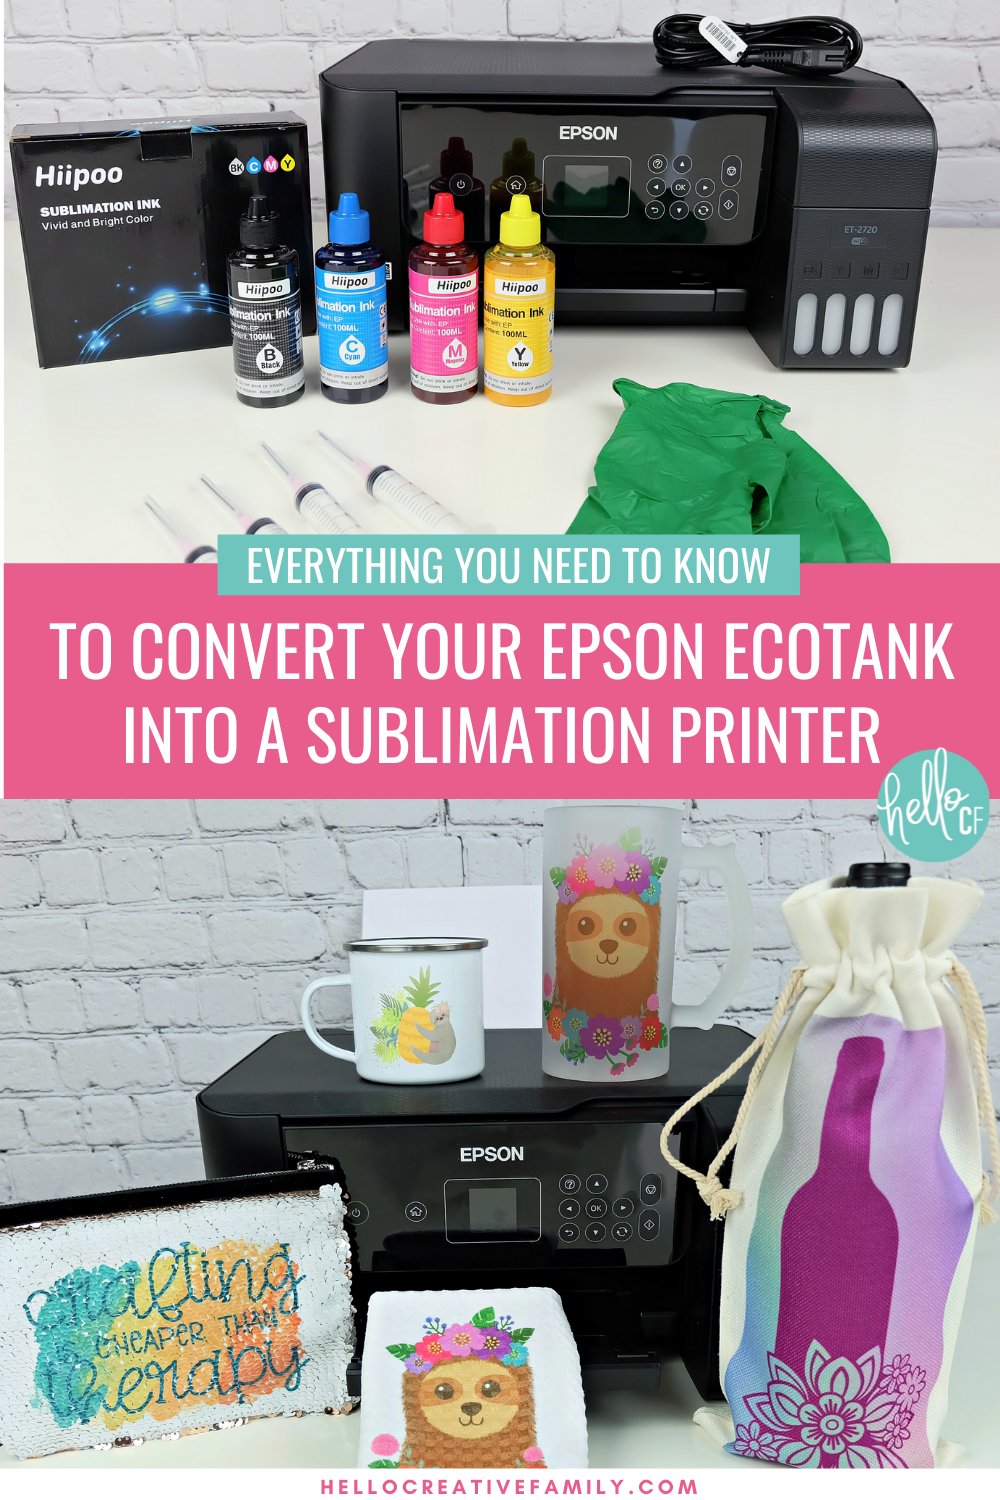 Sublimation printing is the newest hot crafting trend! Traditional sublimation printers can be expensive, so we are sharing how easy it is to convert an Epson EcoTank Printer into a sublimation printer so you can create incredible sublimation crafting projects! This post covers all of your questions and shares step by step instructions and photos for converting your Epson EcoTank printer in minutes!